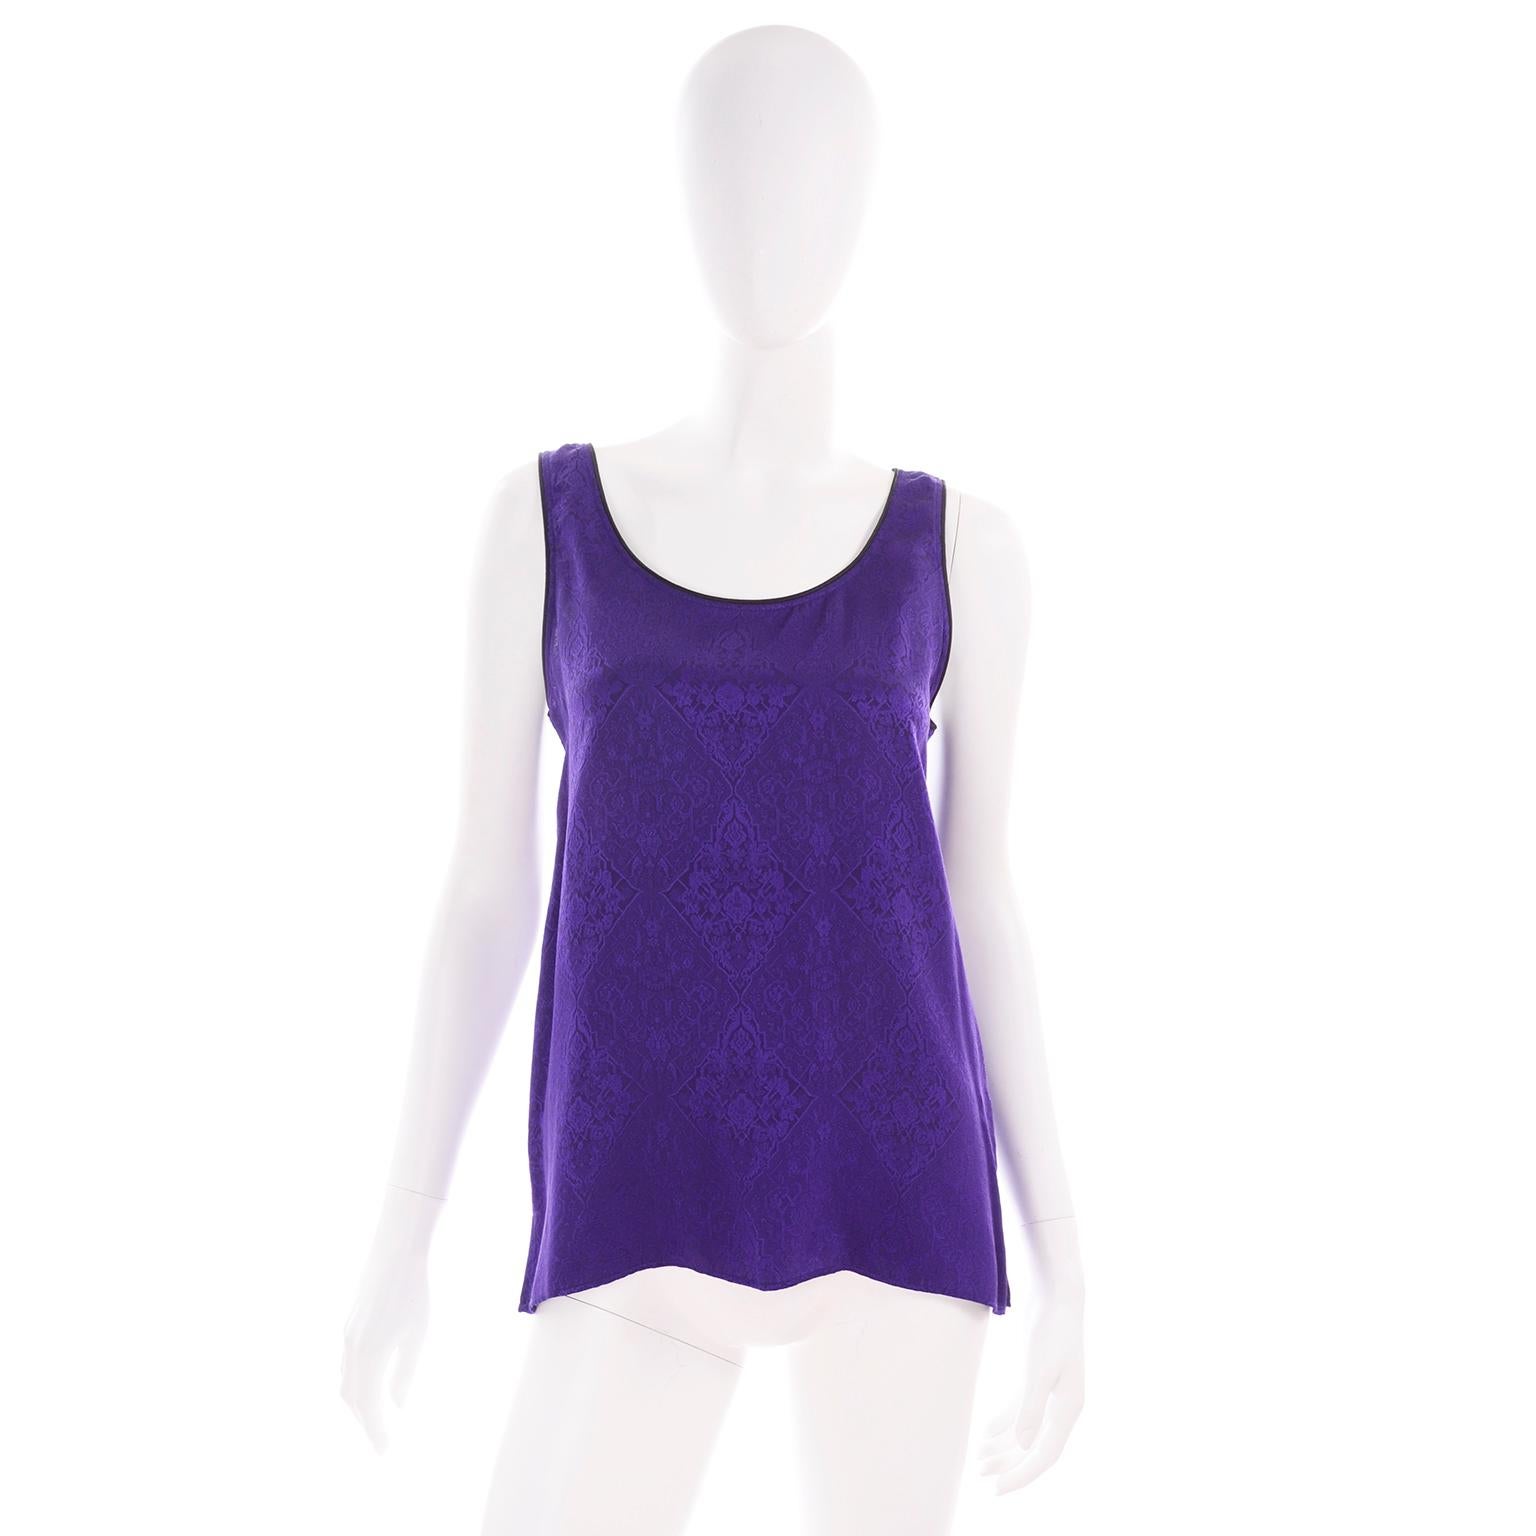 This is a rich purple Yves Saint Laurent silk jacquard sleeveless top with black trim and side slits. The top is labeled a French size 36. Yves Saint Laurent Variation Label and we estimate it to fit a size S/M depending on how you would like it to